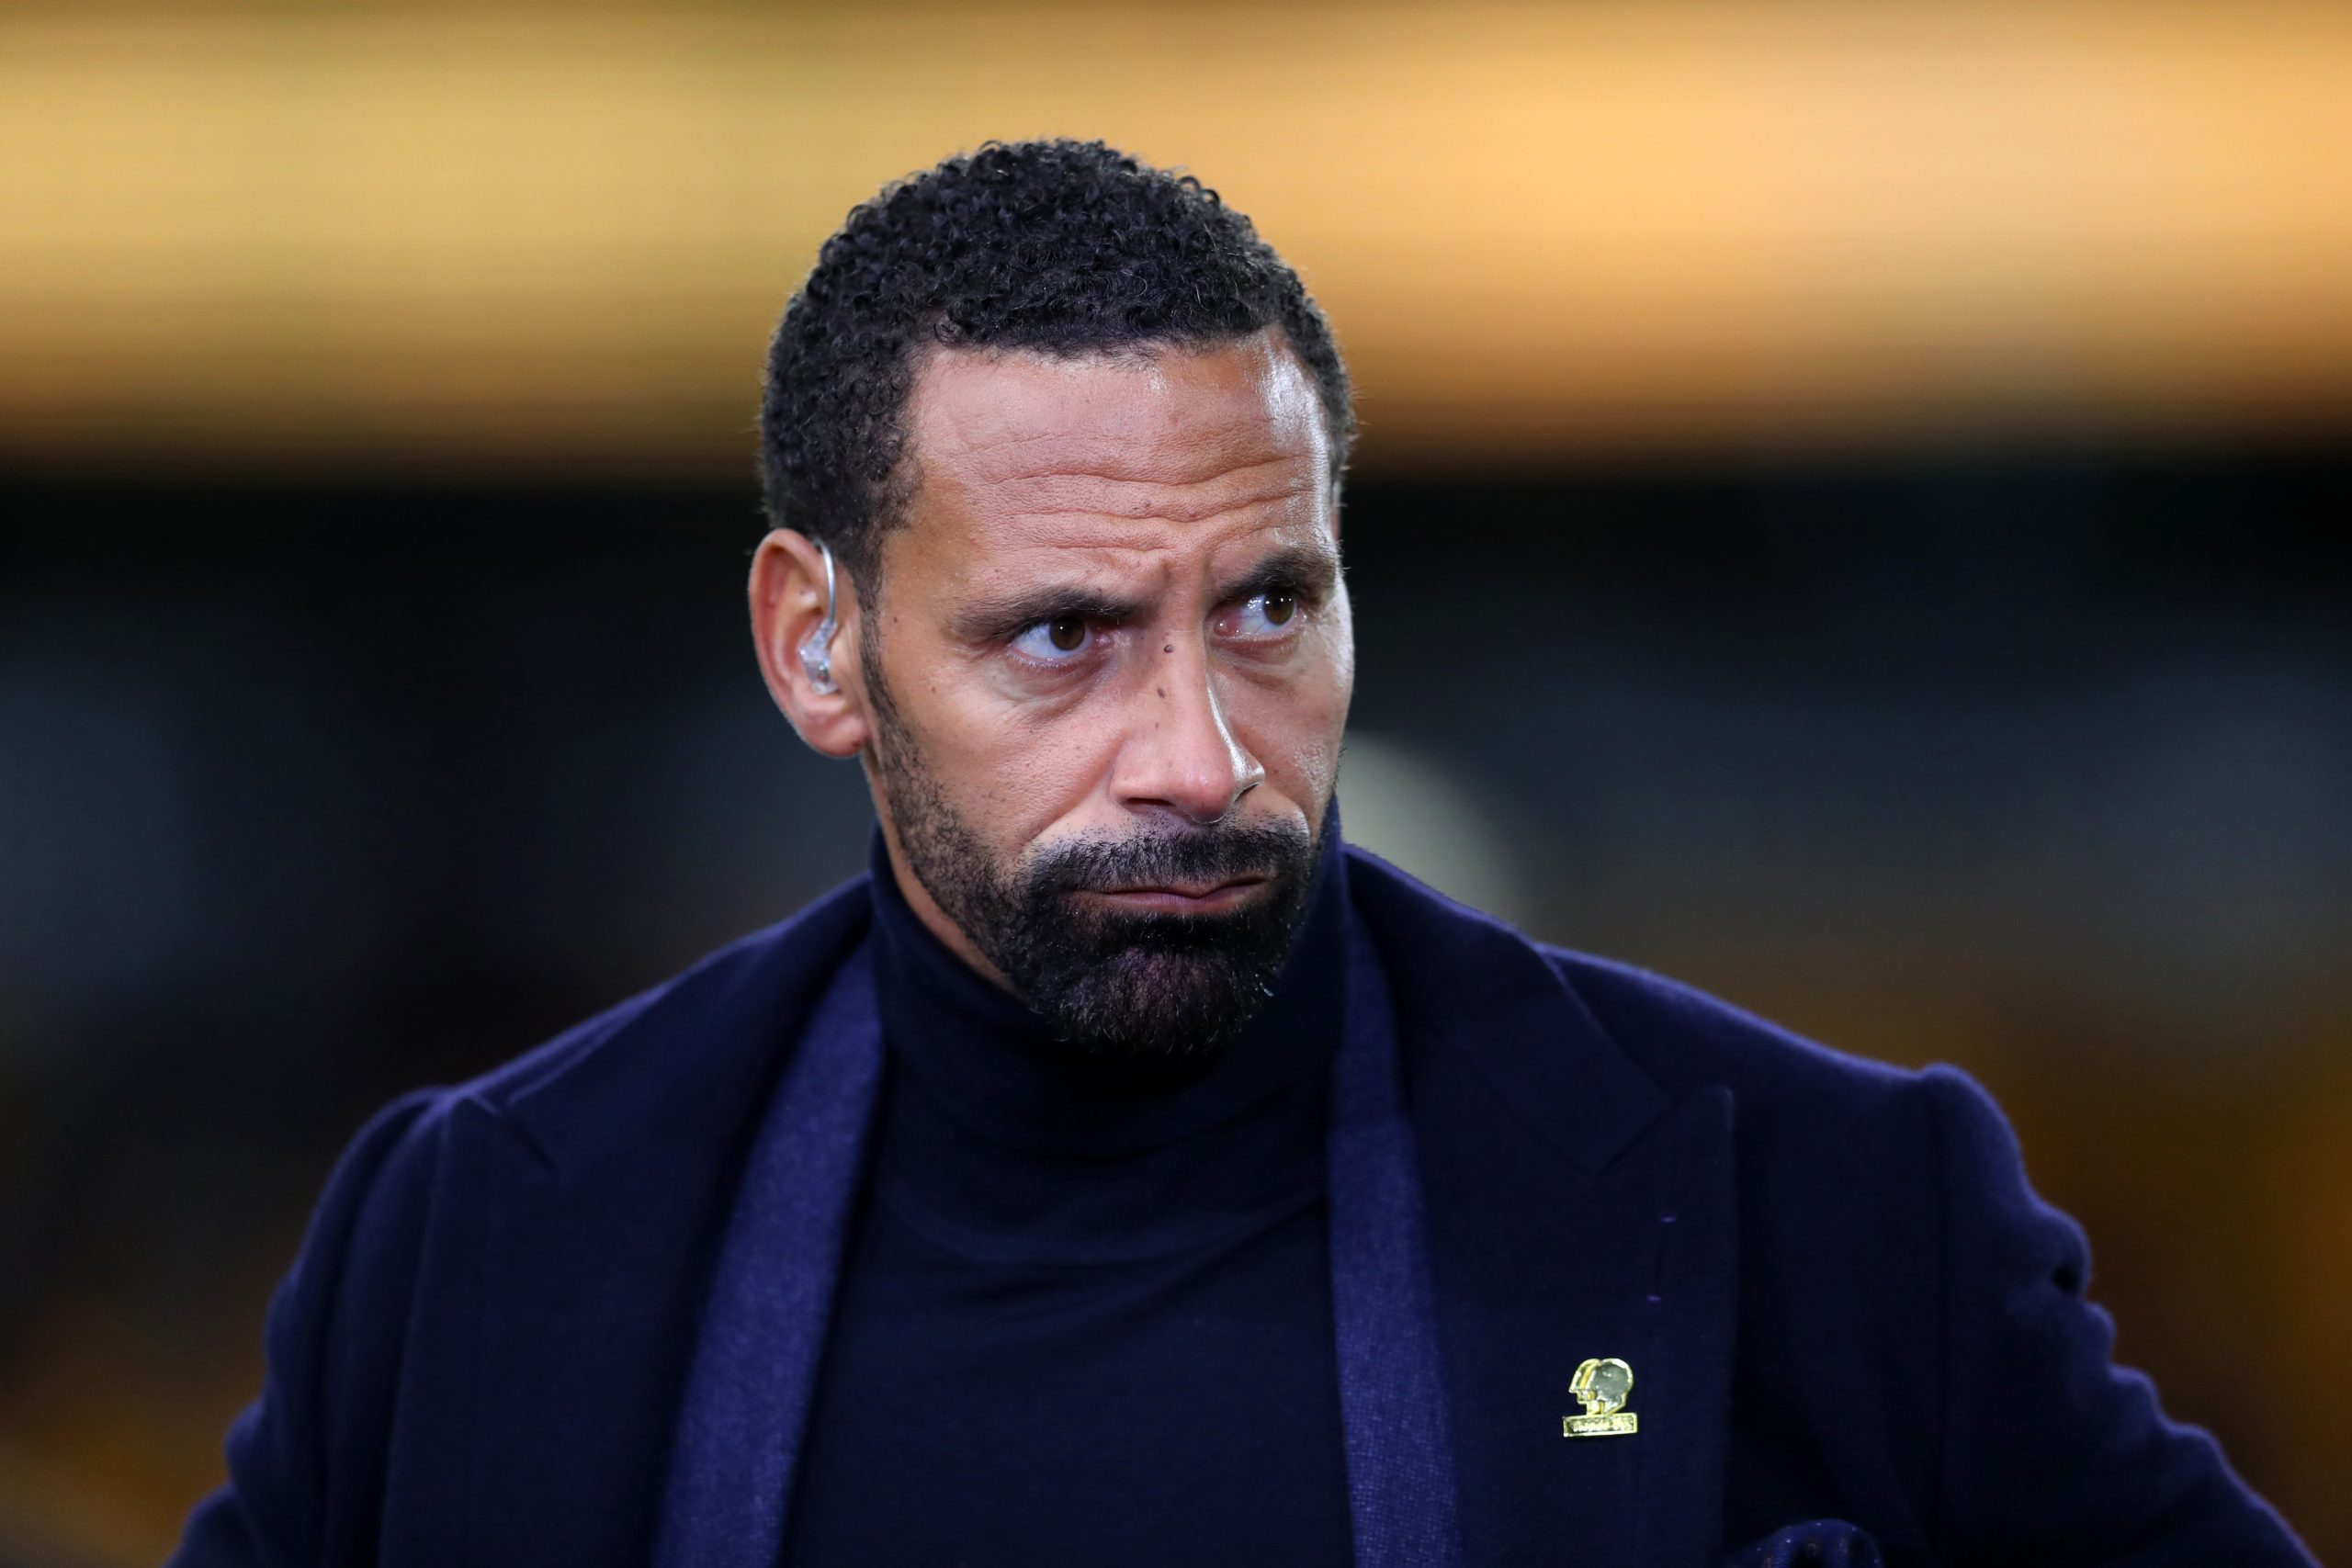 Rio Ferdinand admits being wrong about the 'gulf in class' between Manchester United and Manchester City.